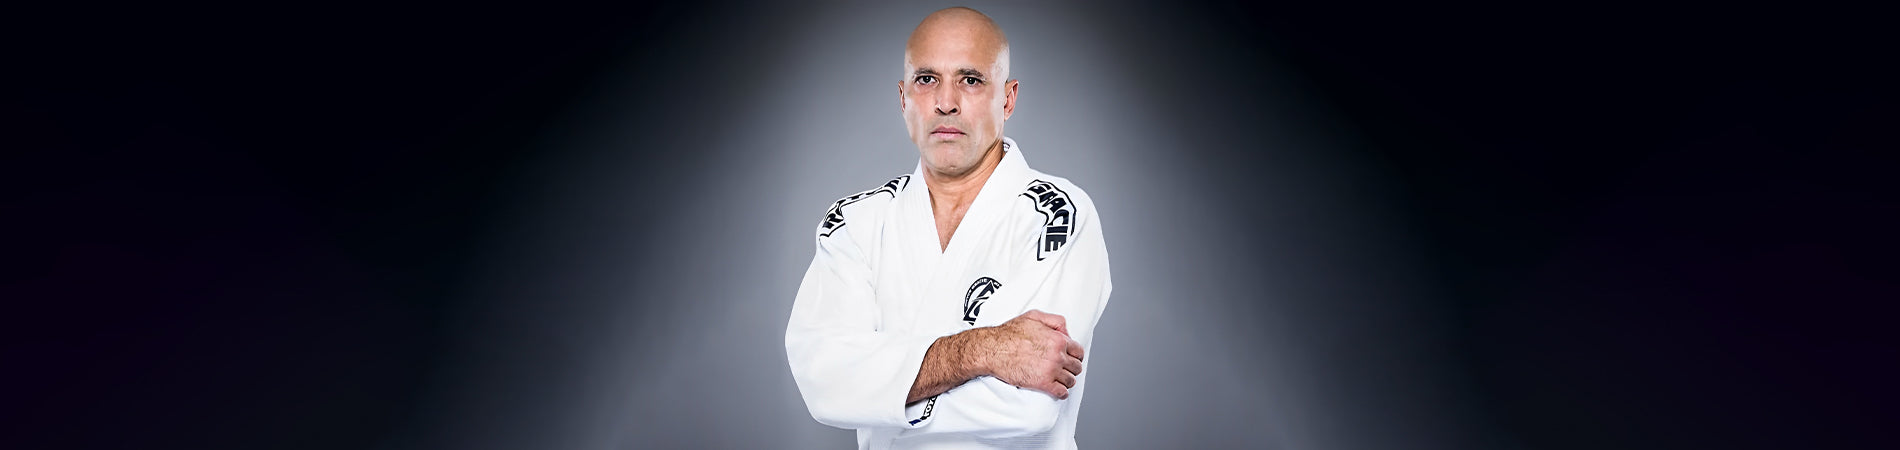 Professor Royce Gracie - The First UFC Hall of Famer